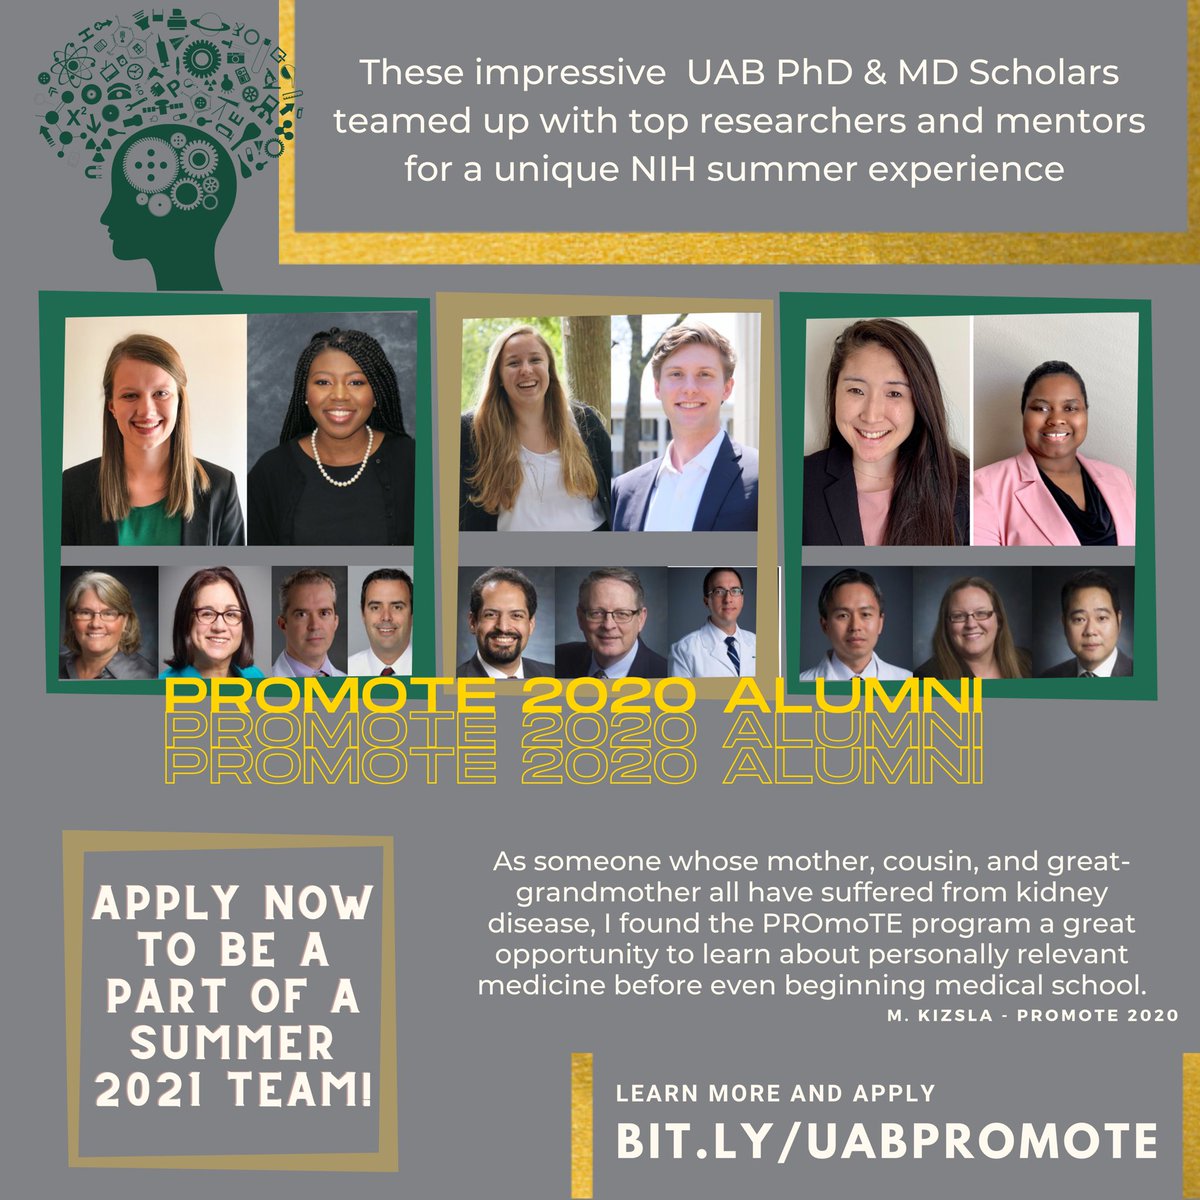 We are proud of our 2020 PROmoTE Alumni! We look forward to adding to the @KidneyTrain_UAB community with the 2021 PROmoTE teams - Accepting applications now - learn more at the link in our bio. @uab_gbs @UABSOM